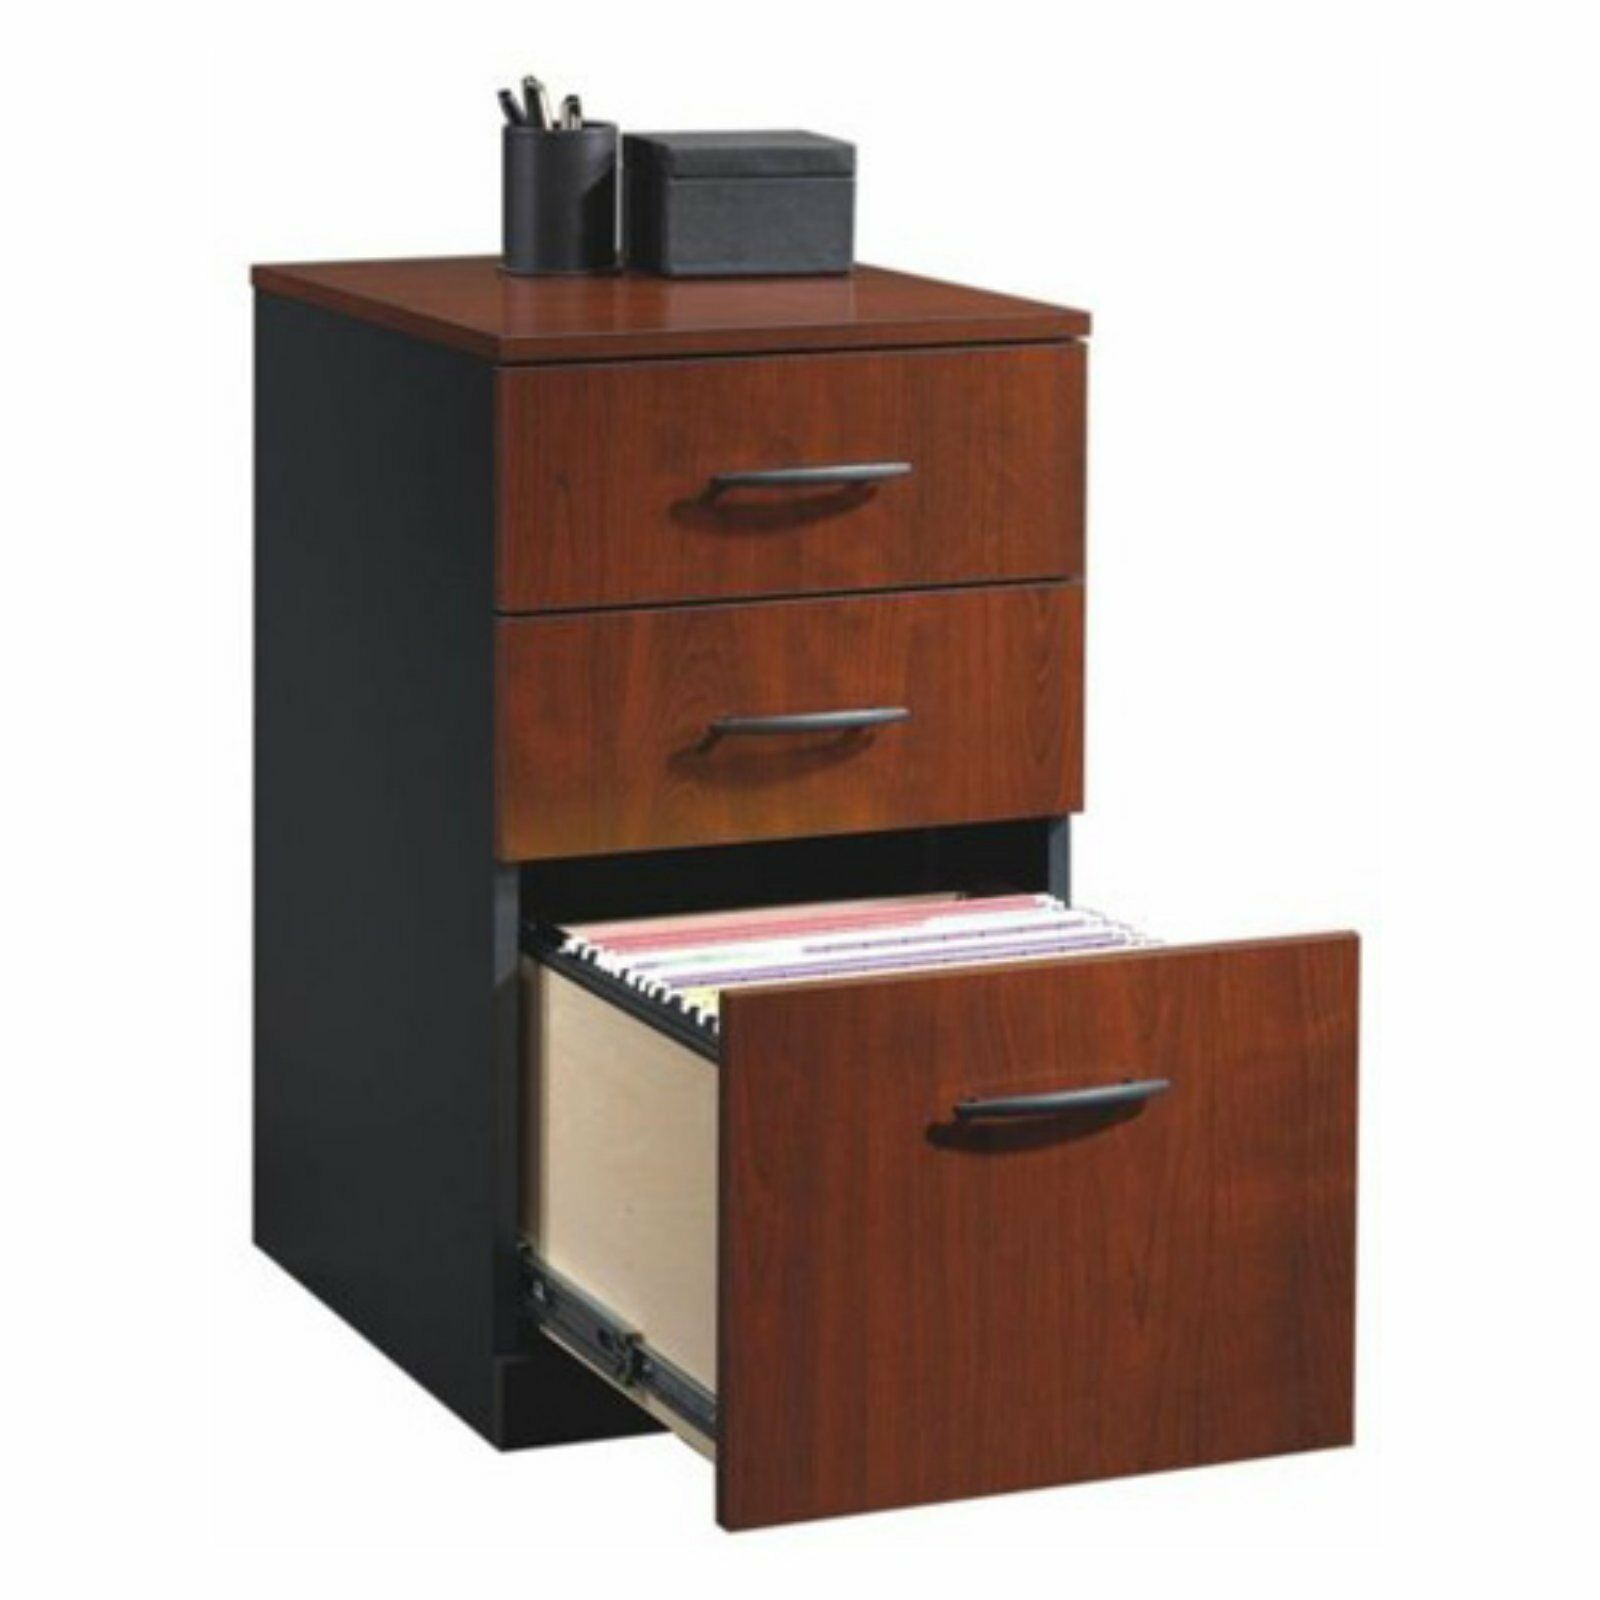 Sauder Via 3 Drawer Pedestal Mobile Classic Cherry Filing Cabinet throughout sizing 1600 X 1600